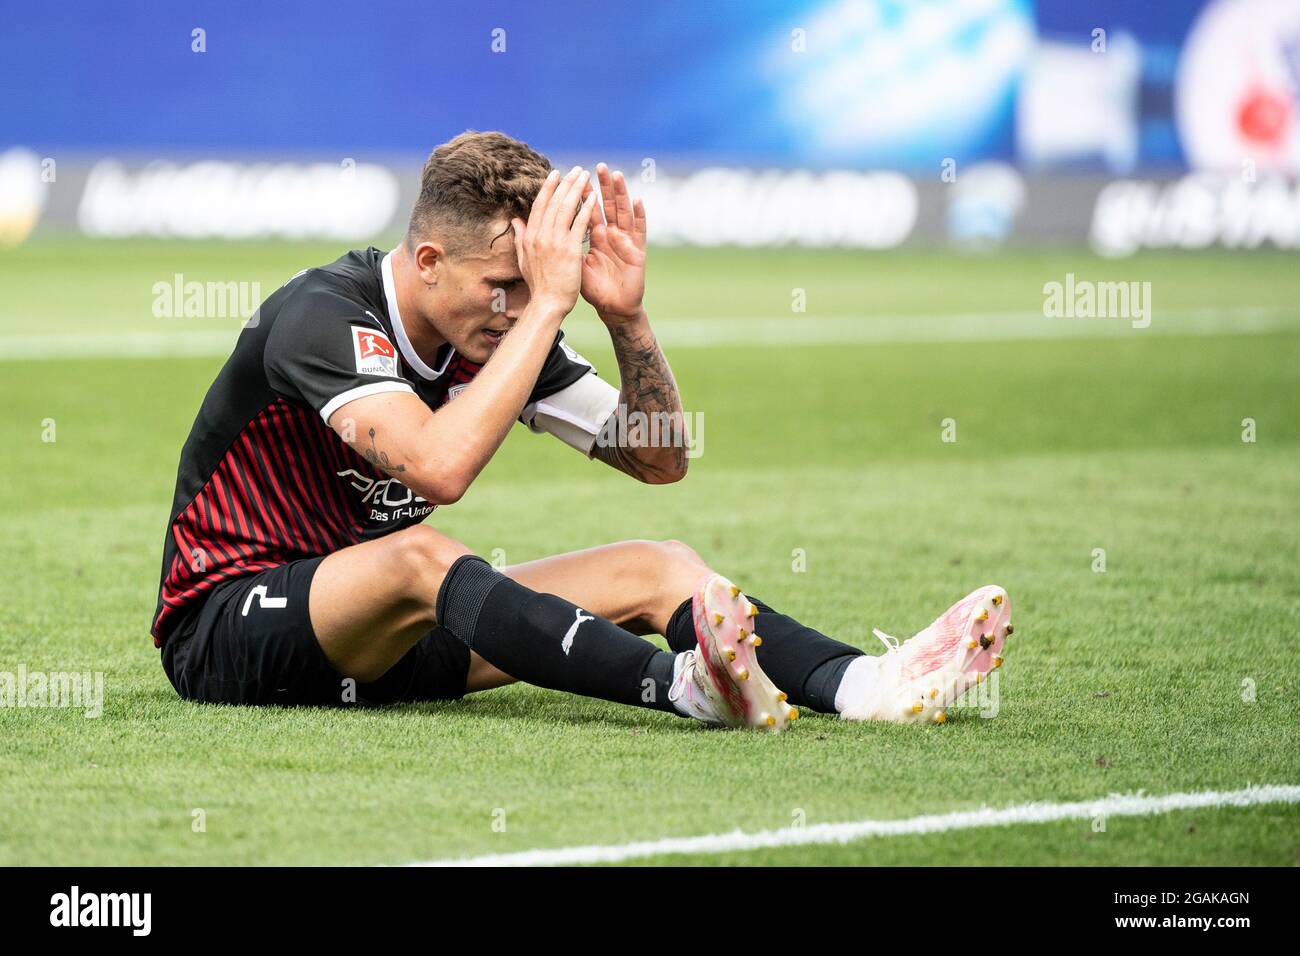 Ingolstadt, Germany. 31st July, 2021. Football: 2. Bundesliga, FC Ingolstadt 04 - 1. FC Heidenheim, Matchday 2 at Audi Sportpark. Dennis Eckert of Ingolstadt reacts after a missed goal chance. Credit: Matthias Balk/dpa - IMPORTANT NOTE: In accordance with the regulations of the DFL Deutsche Fußball Liga and/or the DFB Deutscher Fußball-Bund, it is prohibited to use or have used photographs taken in the stadium and/or of the match in the form of sequence pictures and/or video-like photo series./dpa/Alamy Live News Stock Photo